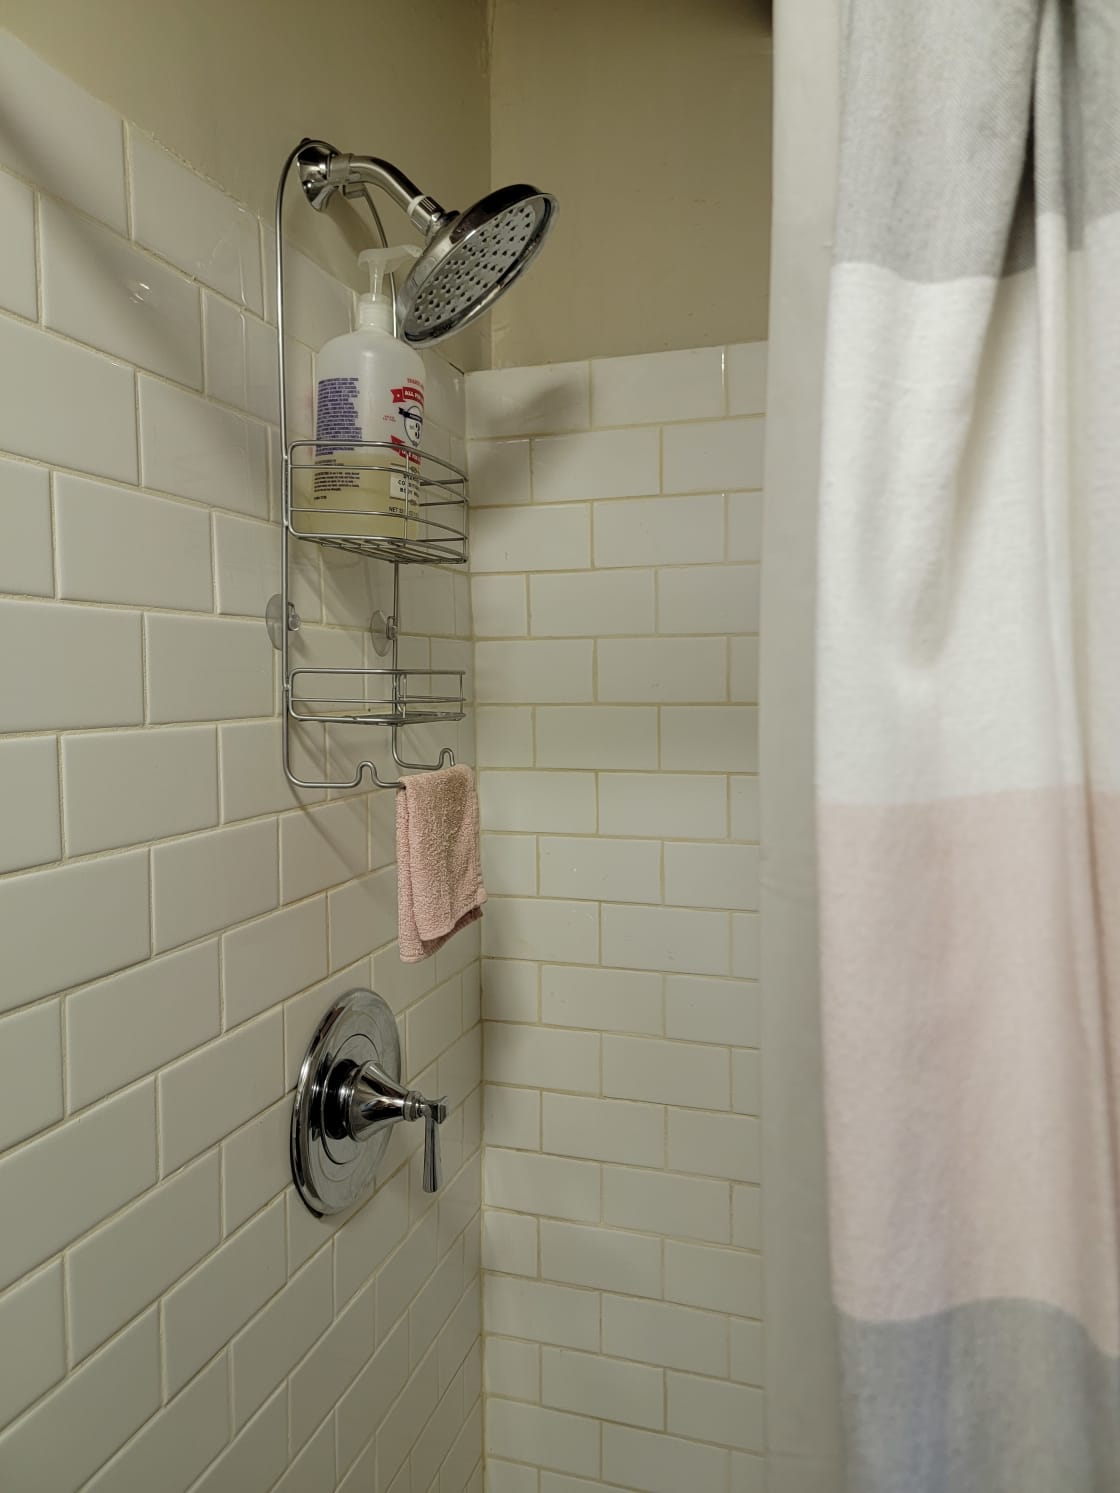 We have an abundant supply of hot water that makes showers here a delightful treat!